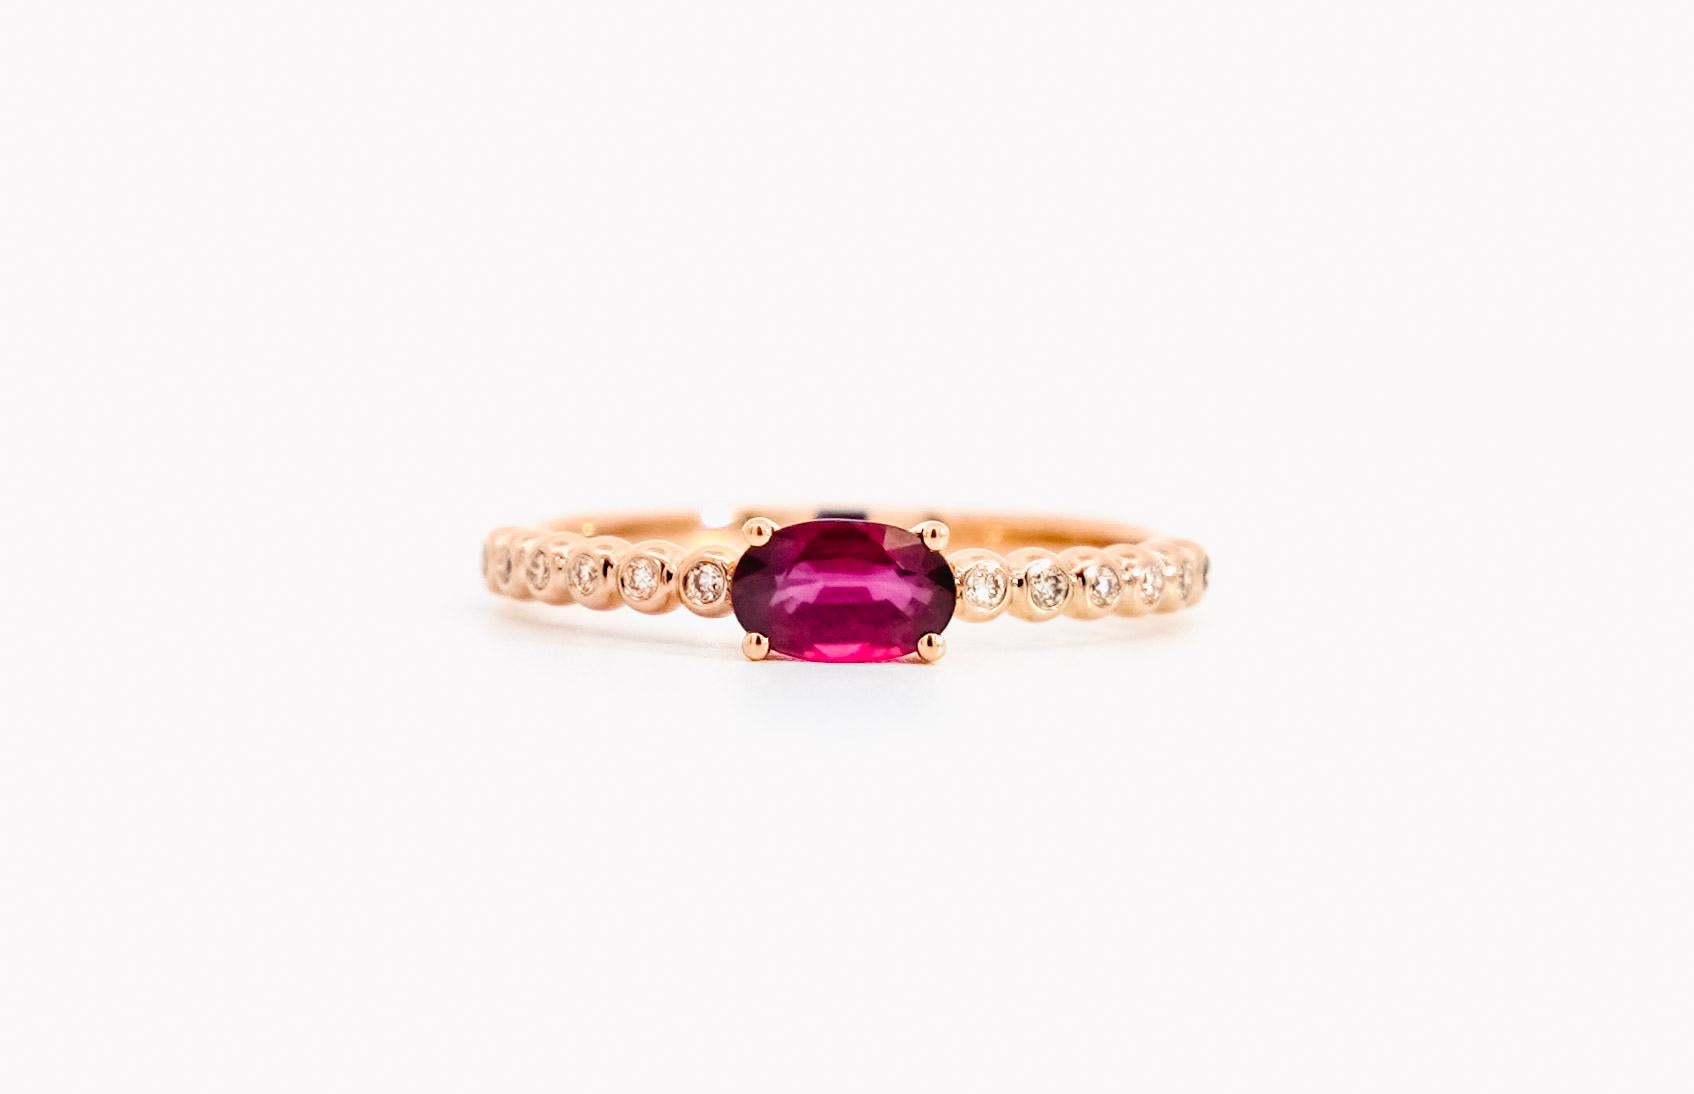 18K rose gold Ruby and Diamond ring. Set with natural gemstones and glistening 18k solid gold. Dainty 2mm thin width makes it ideal as a stacked band or wearing alone. The center stone bears a richly saturated red color and a perfectly faceted oval